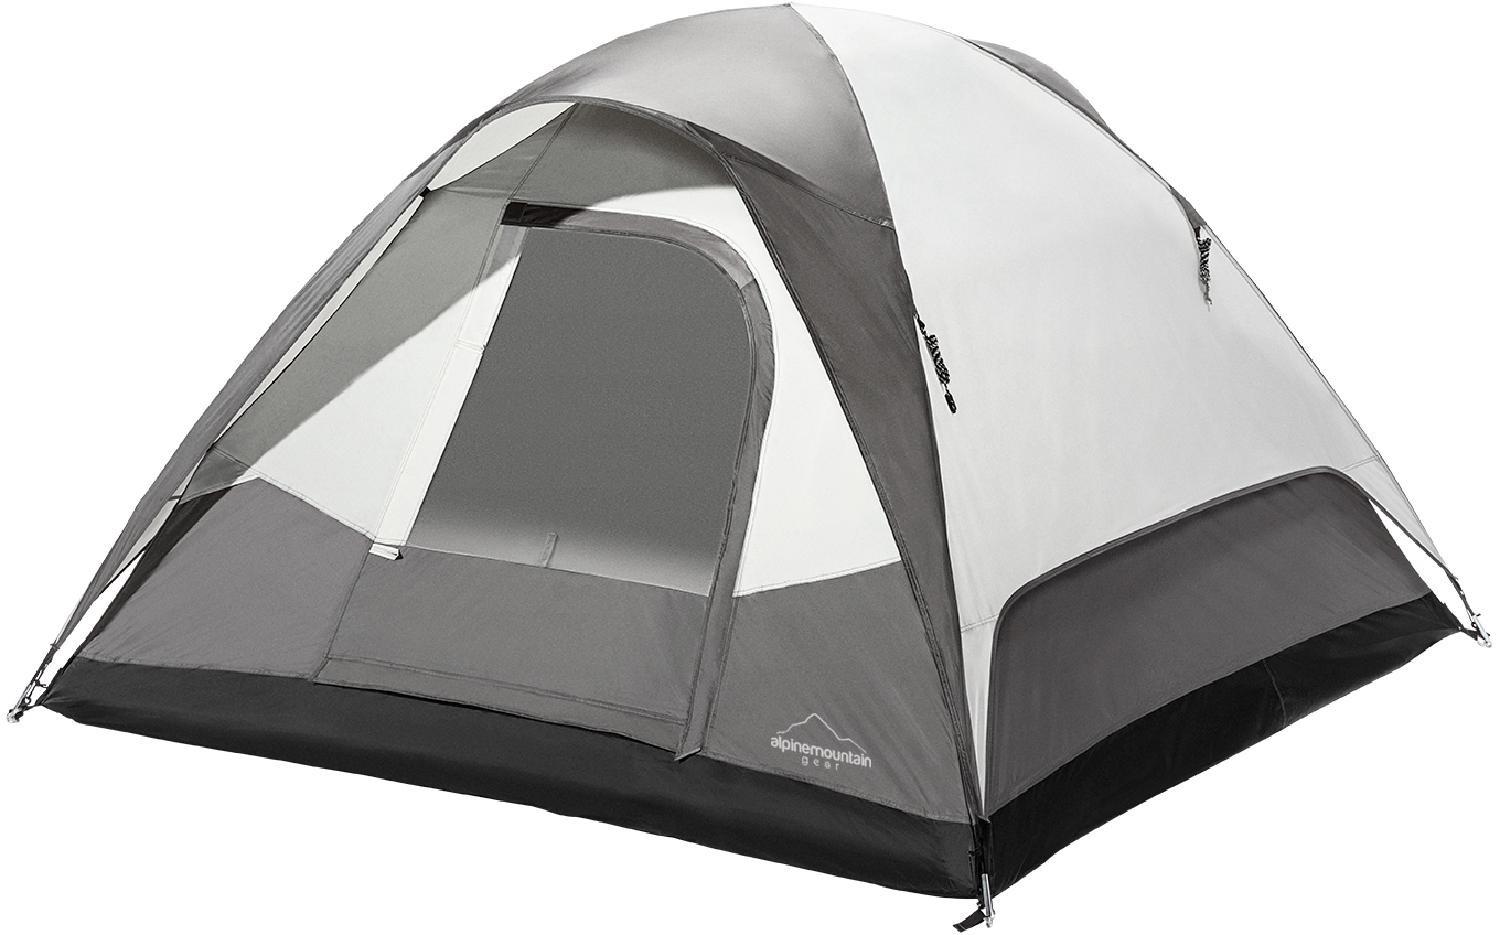 Alpine Mountain Gear Weekender Tents for $43.78 Shipped